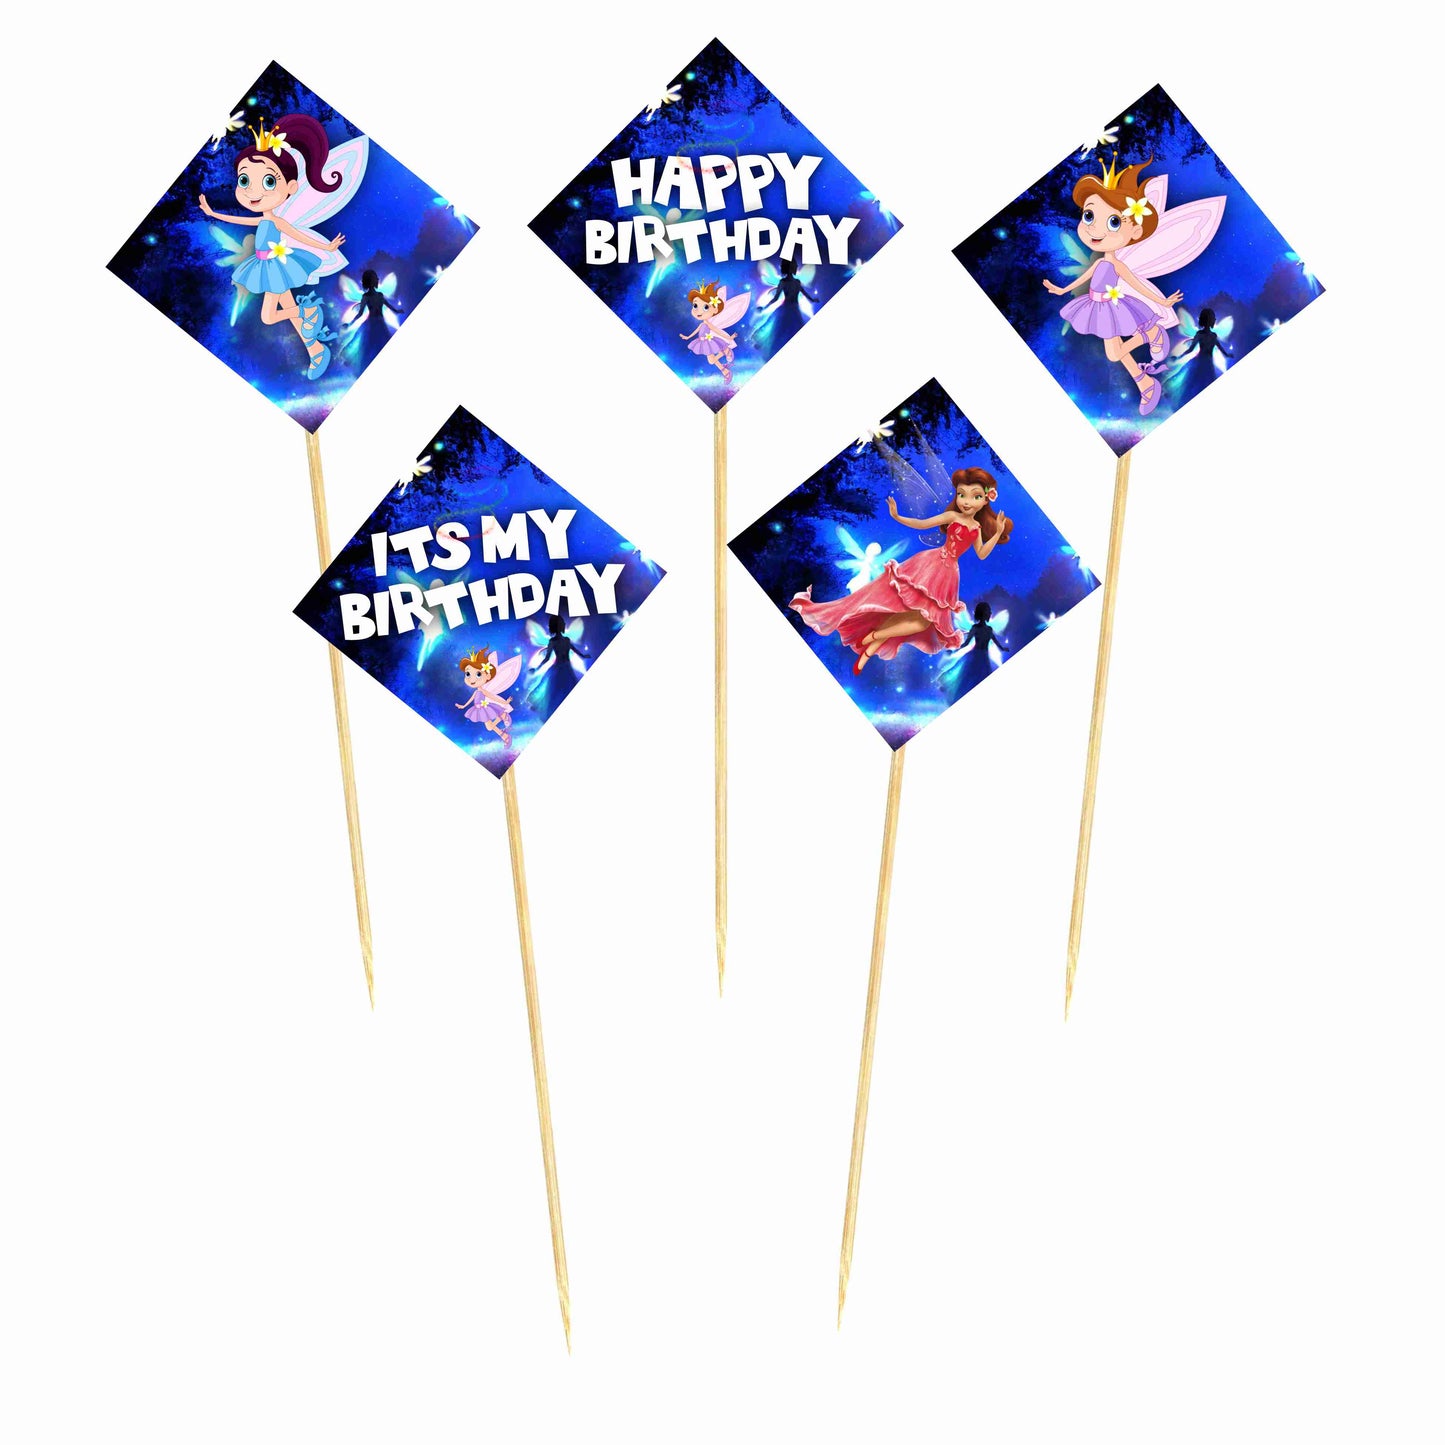 Fairy Theme Cake Topper Pack of 10 Nos for Birthday Cake Decoration Theme Party Item For Boys Girls Adults Birthday Theme Decor